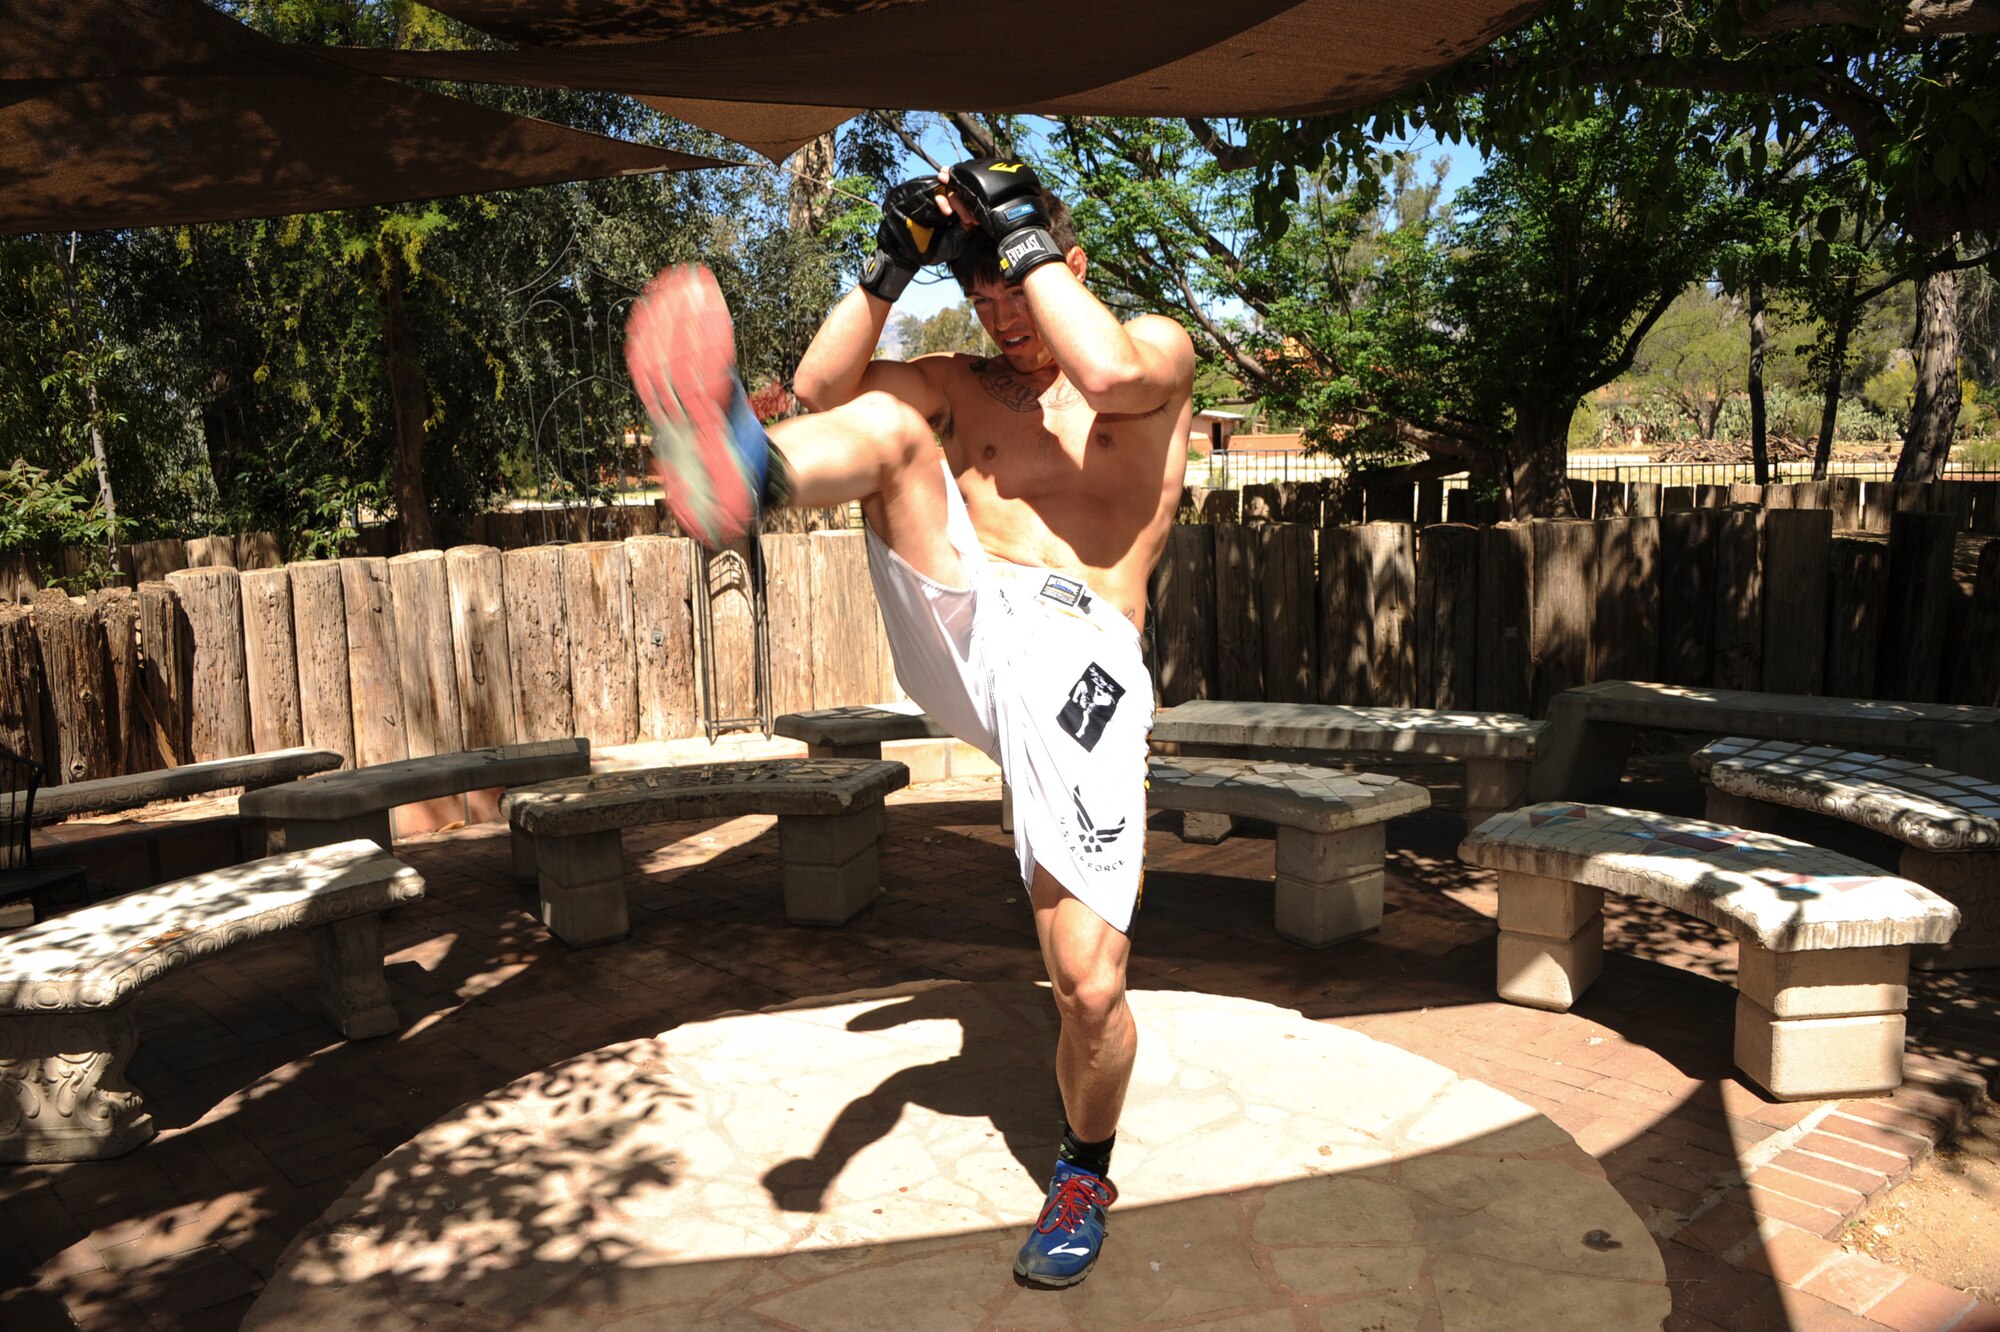 U.S. Air Force Senior Airman Jeremiah Garber, 355th Maintenance Group analyst, performs a high kick during training at the Amity Circle Tree Ranch in Tucson, Ariz., March 26, 2016. Garber practiced his technique while imagining an opponent in front of him. (U.S. Air Force photo by Airman Nathan H. Barbour/Released)